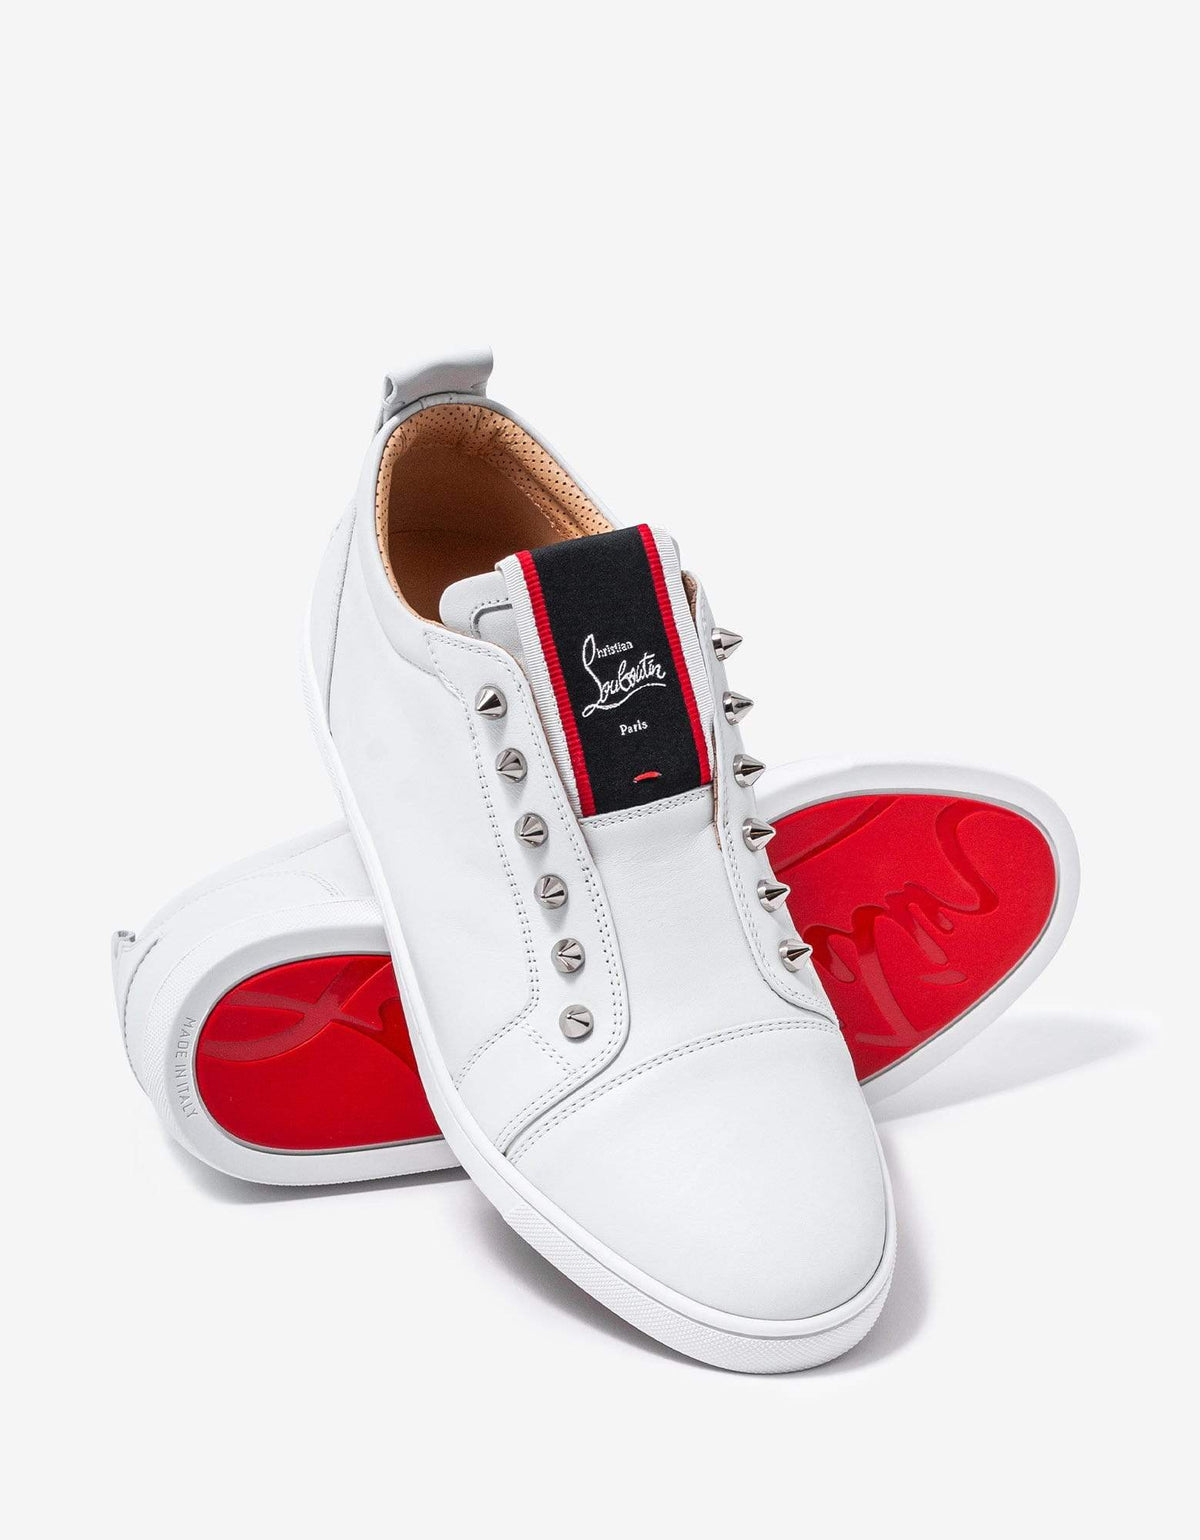 Christian Louboutin F.A.V Fique A Vontade White Leather Trainers